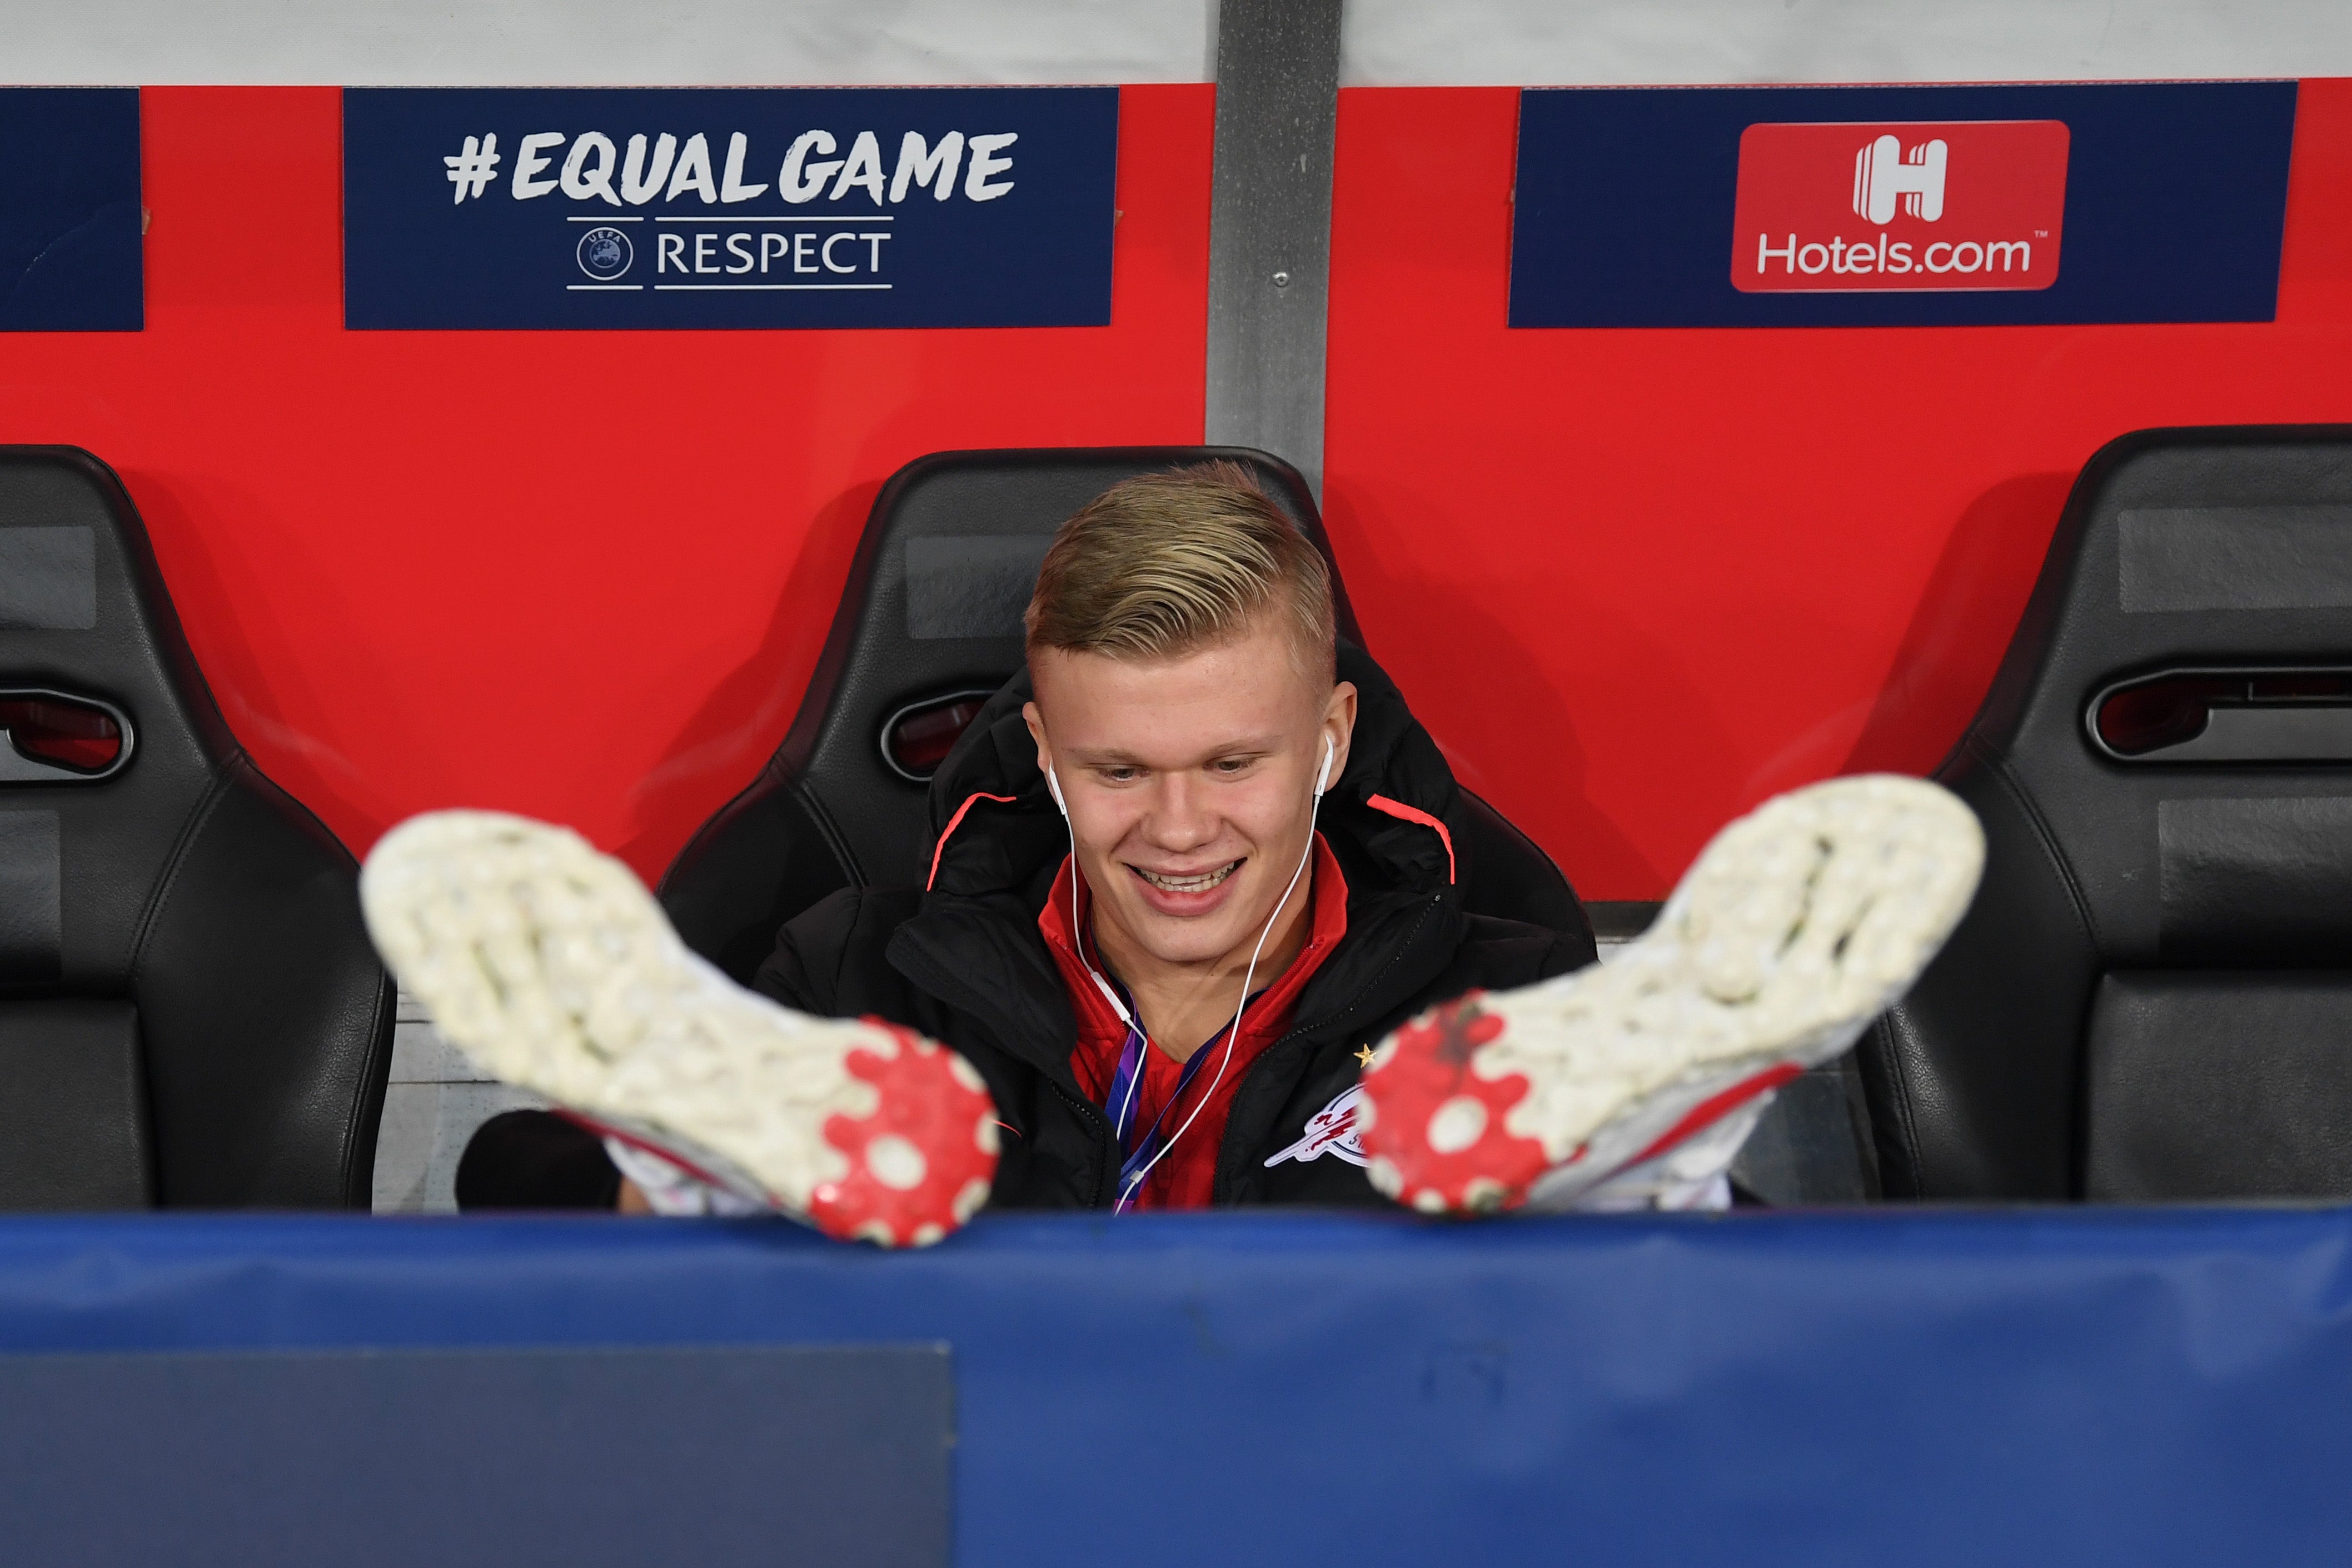 Erling Haaland at RB Salzburg before a Champions League match with Liverpool